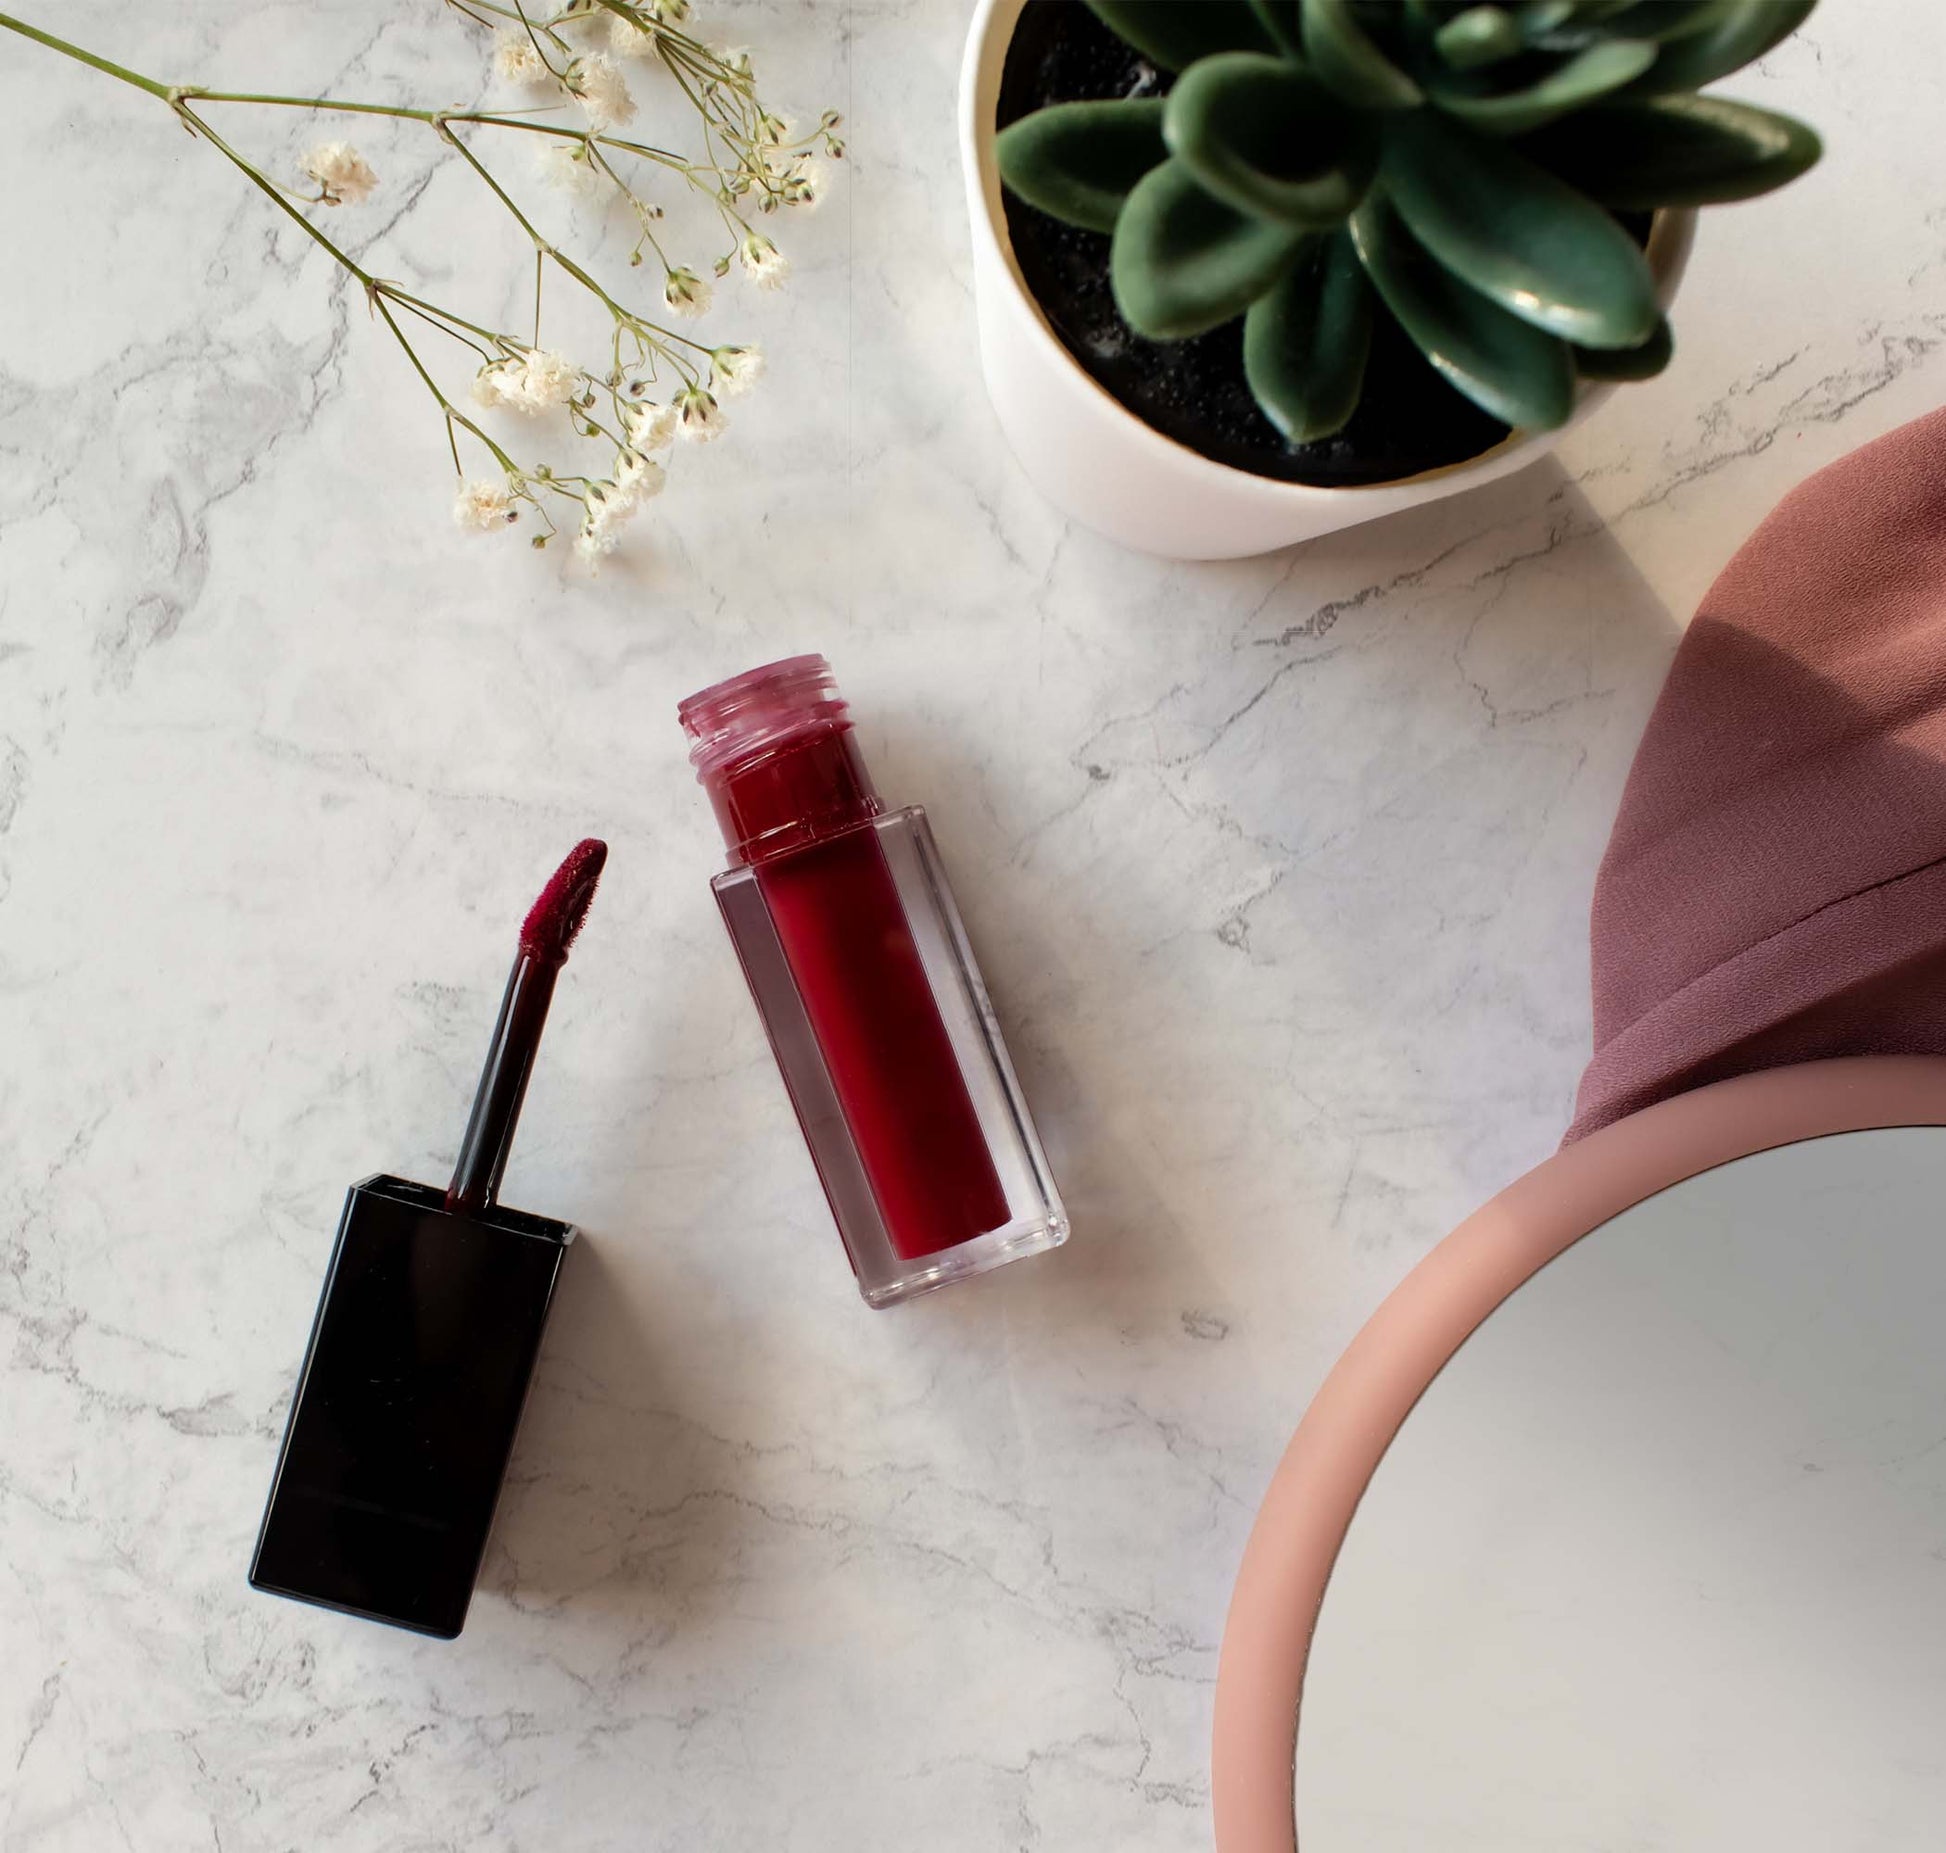 Try Cruisin Organics' Twilight Matte Lip Stain for a classic, long-lasting matte look with added vitamin E.